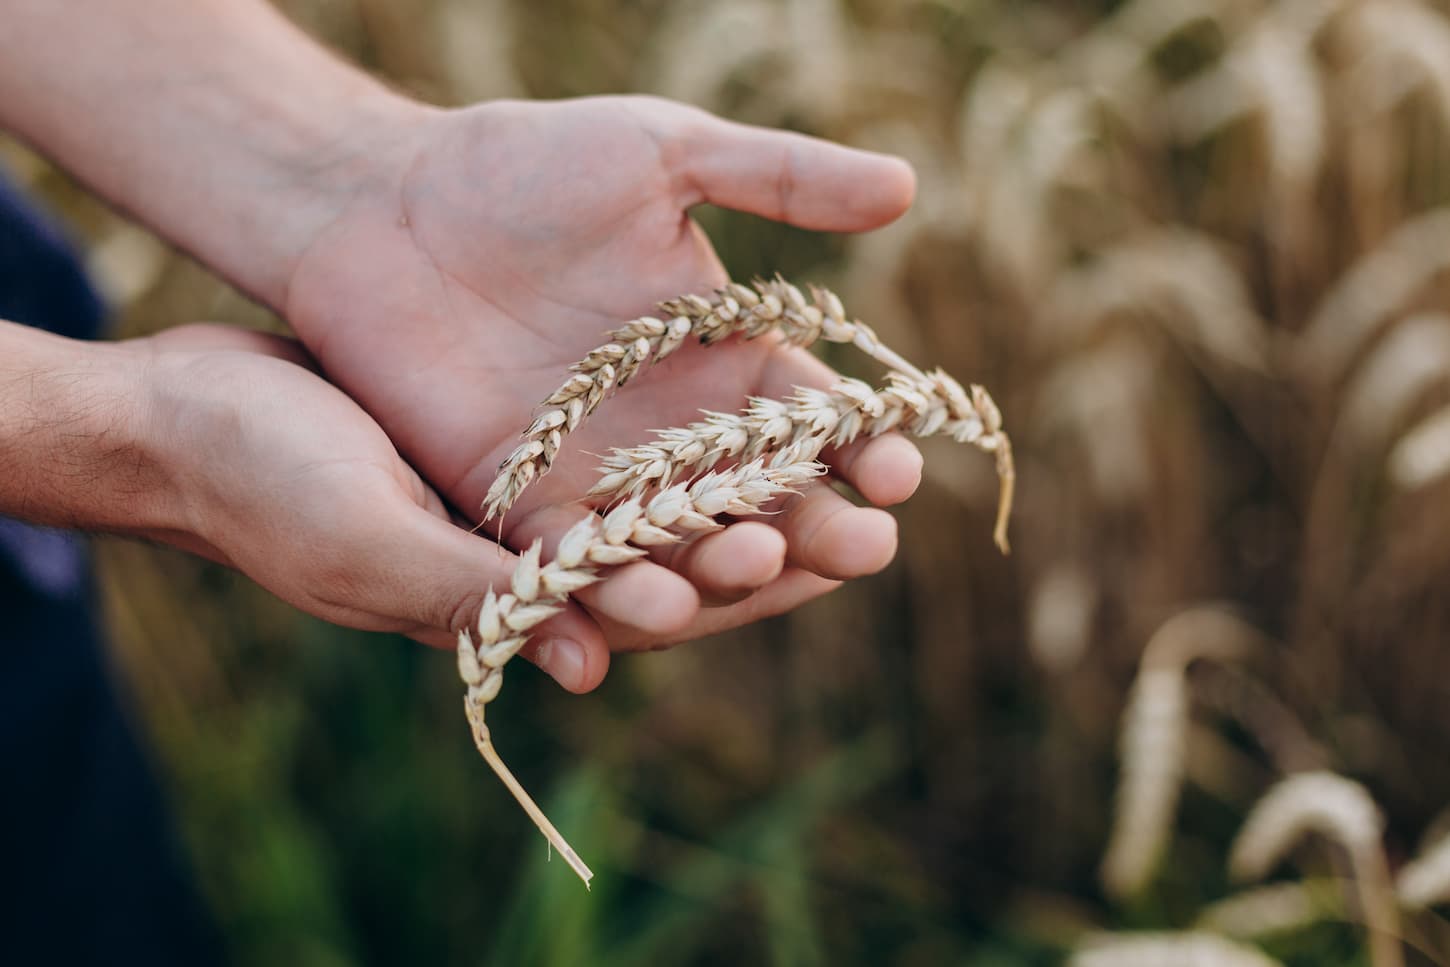 An image of a male's hands holding wheat on a farm background.